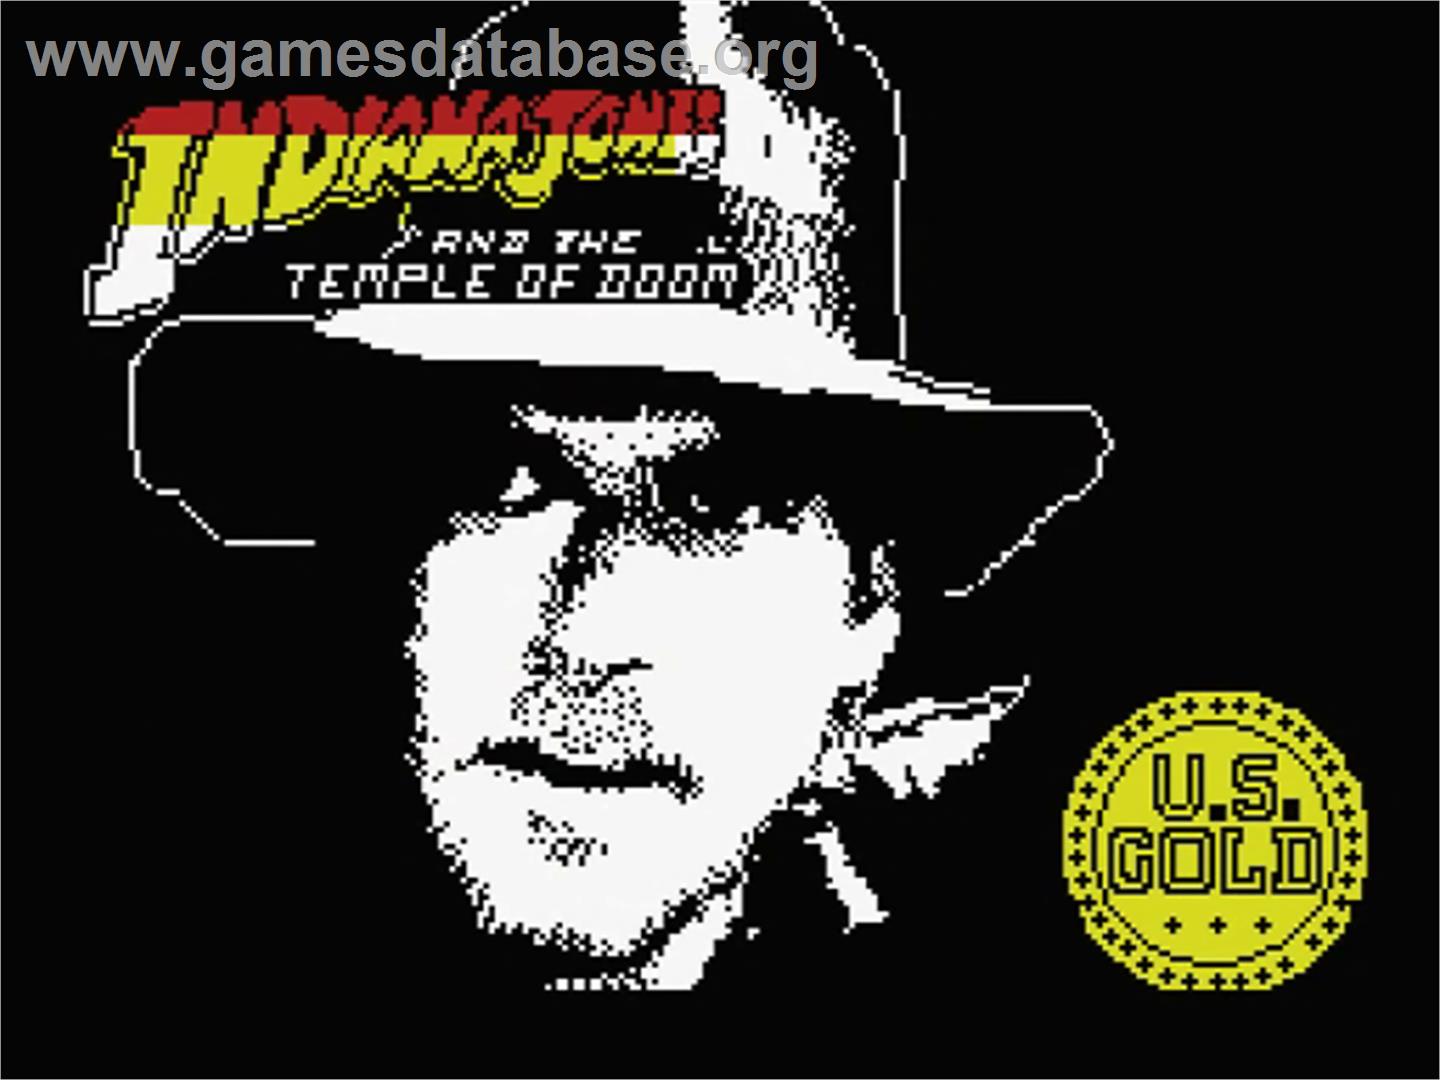 Indiana Jones and the Temple of Doom - MSX - Artwork - Title Screen